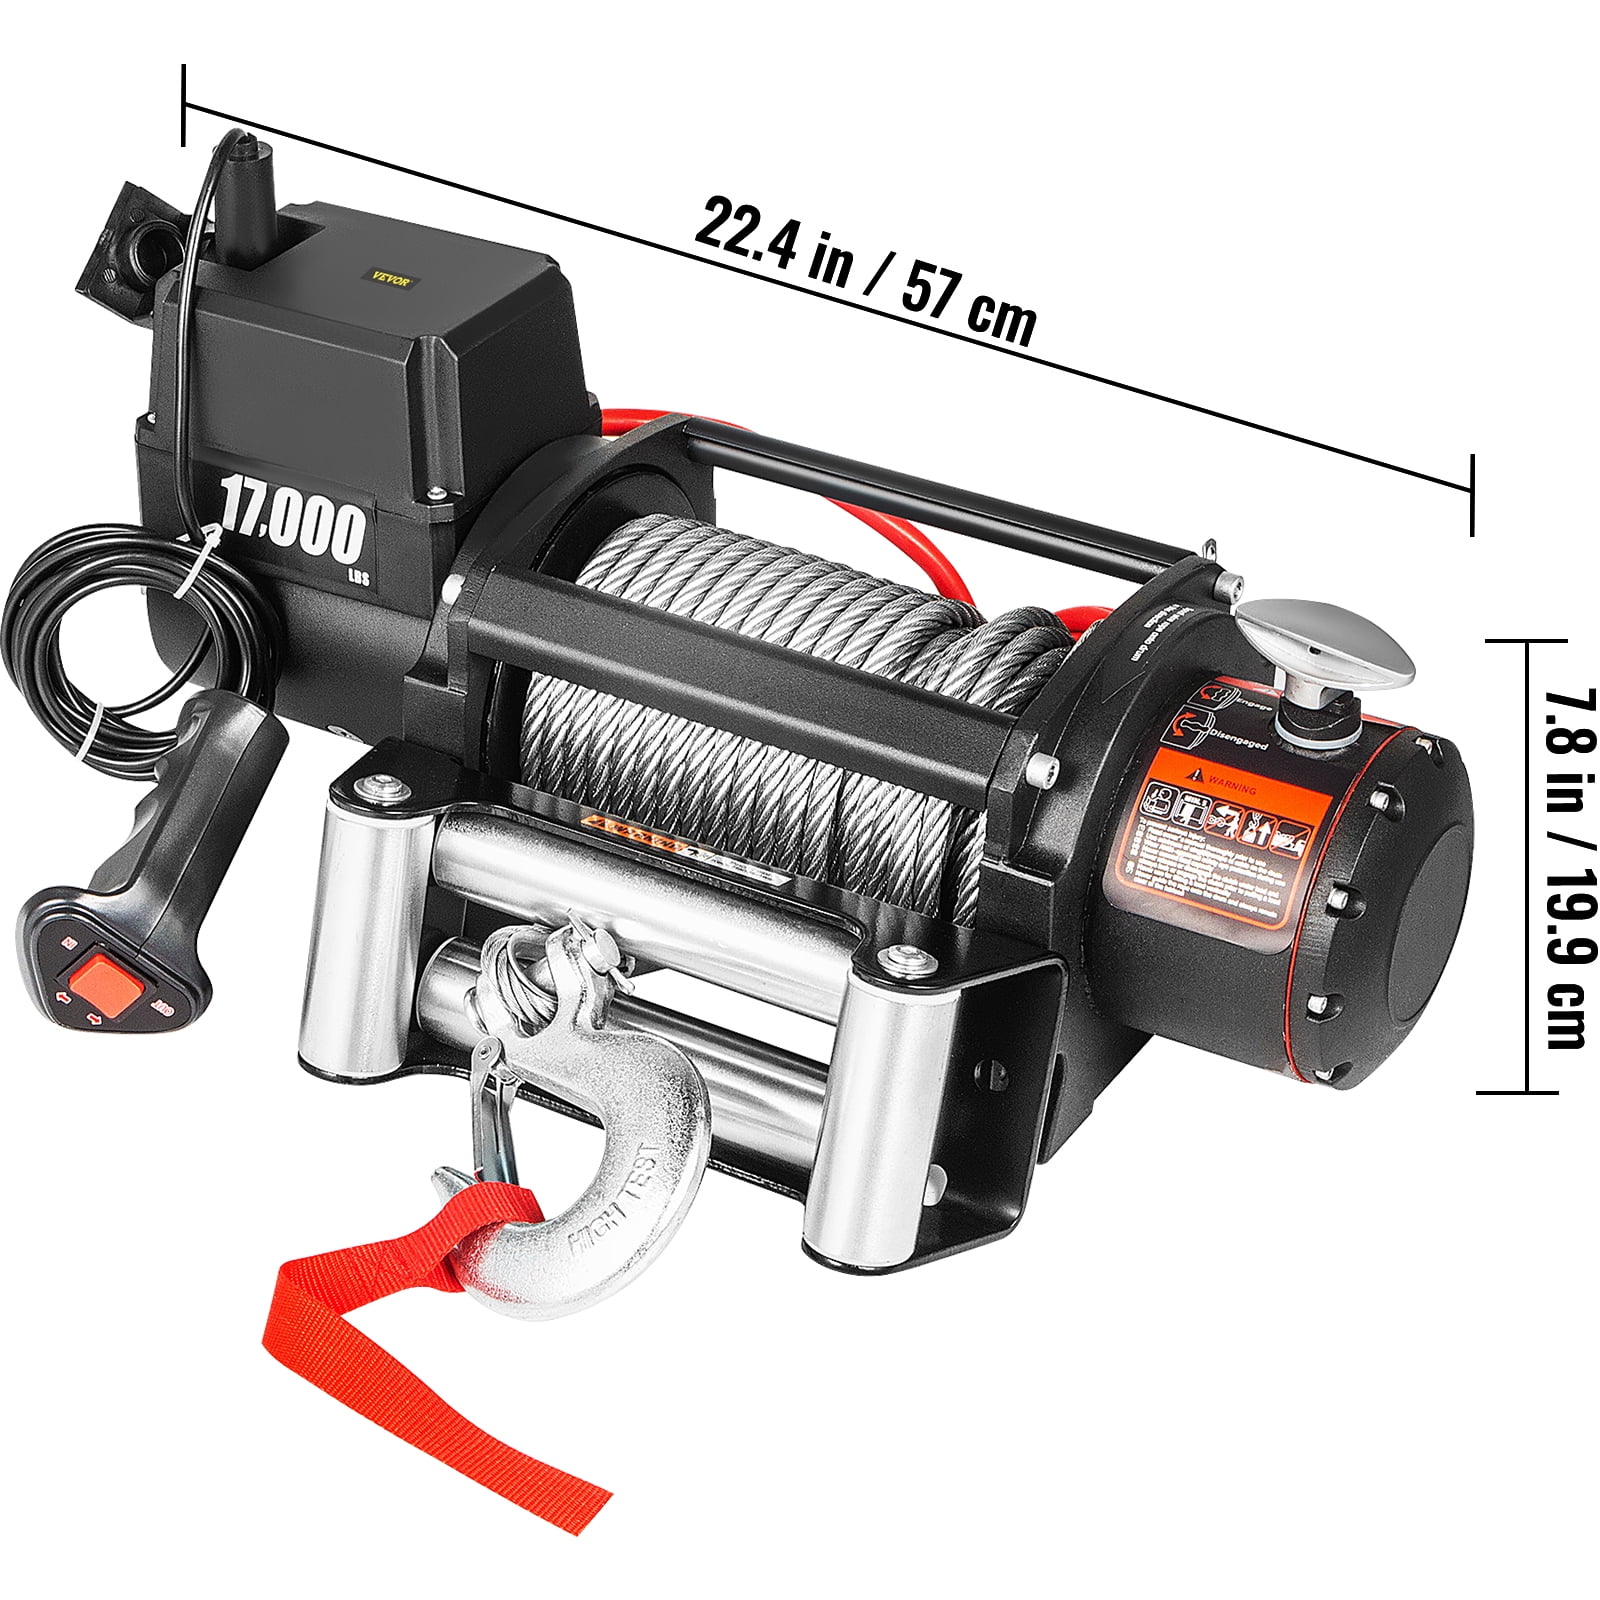 VEVOR Electric Winch, 12V 18,000 lb Load Capacity Steel Rope Winch, IP67  7/16” x 85ft